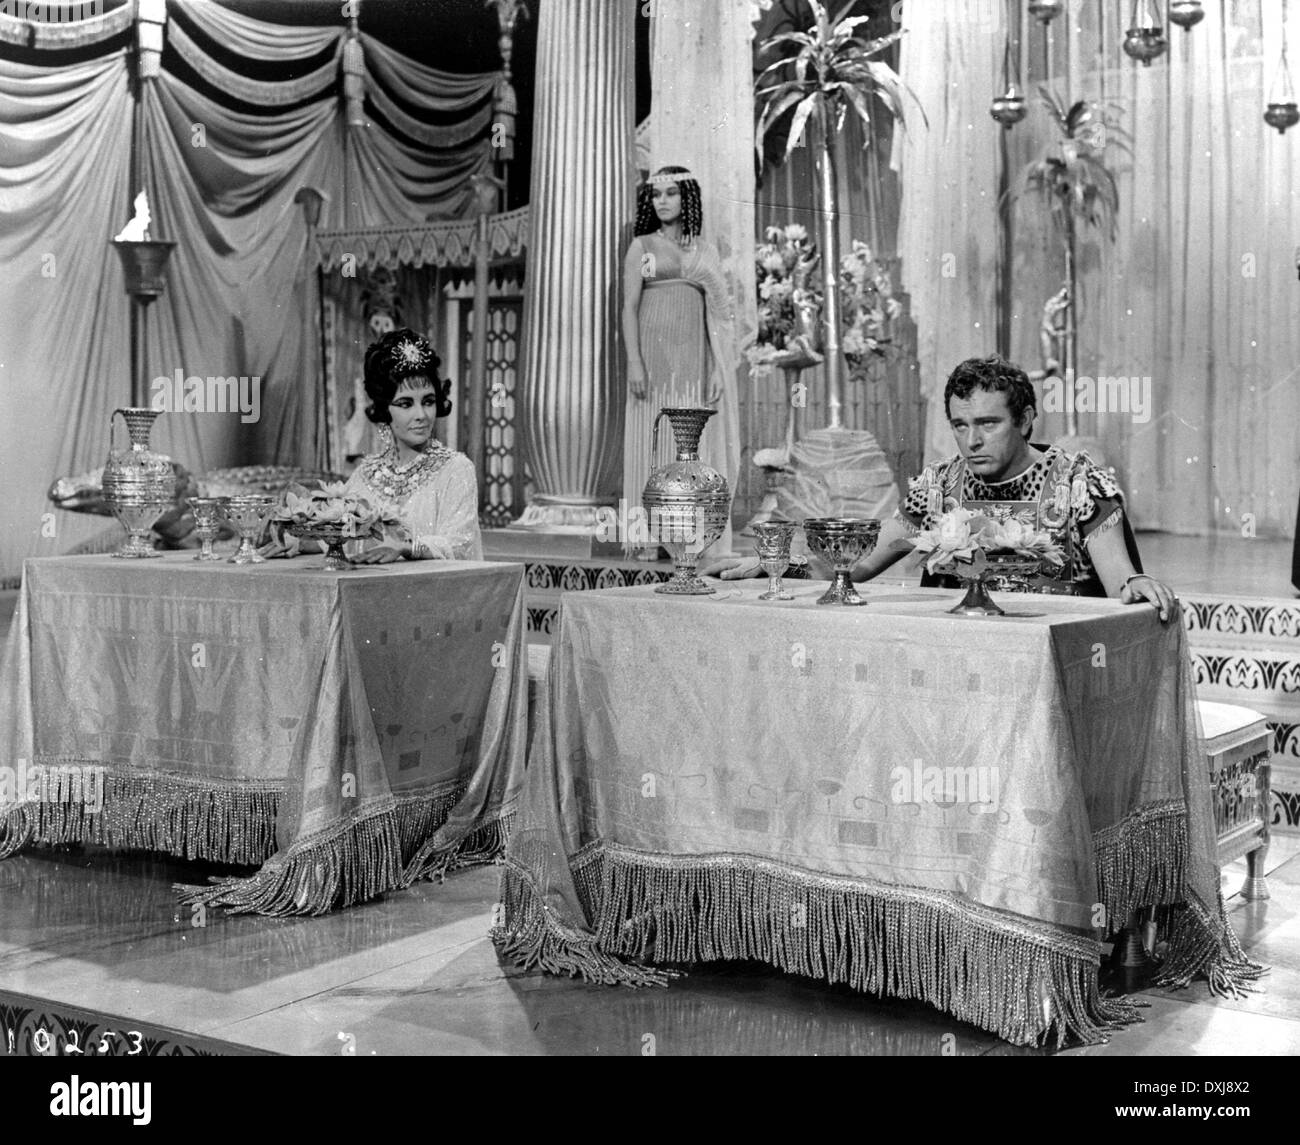 Elizabeth taylor as cleopatra Black and White Stock Photos & Images - Alamy